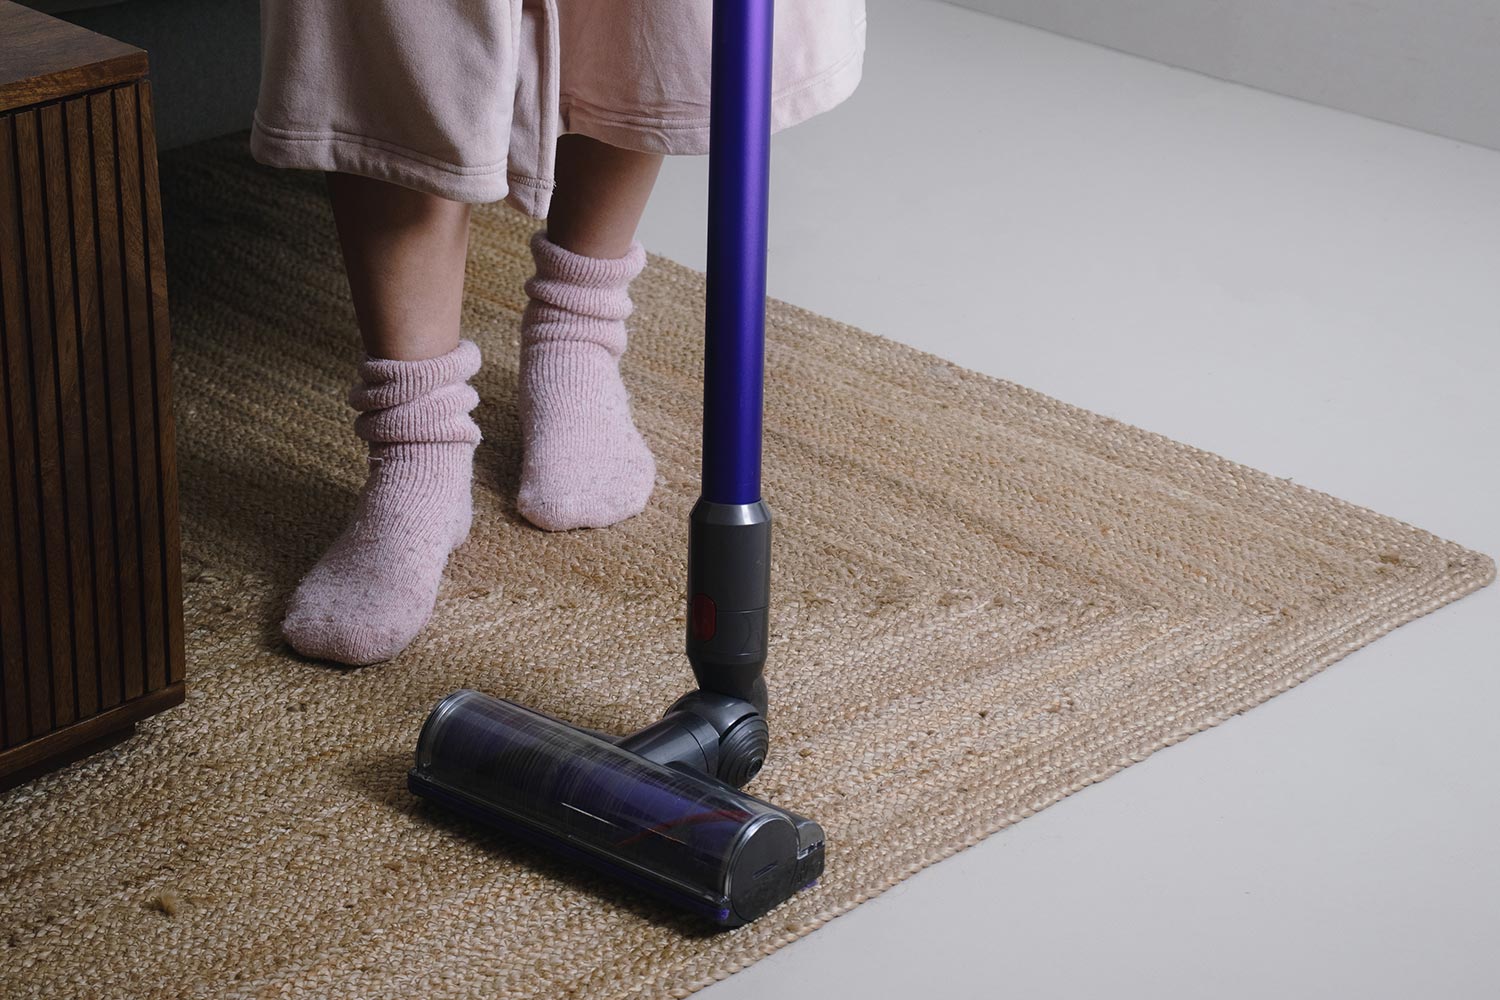 The girl cleans the flooring in the room with a hand vacuum cleaner